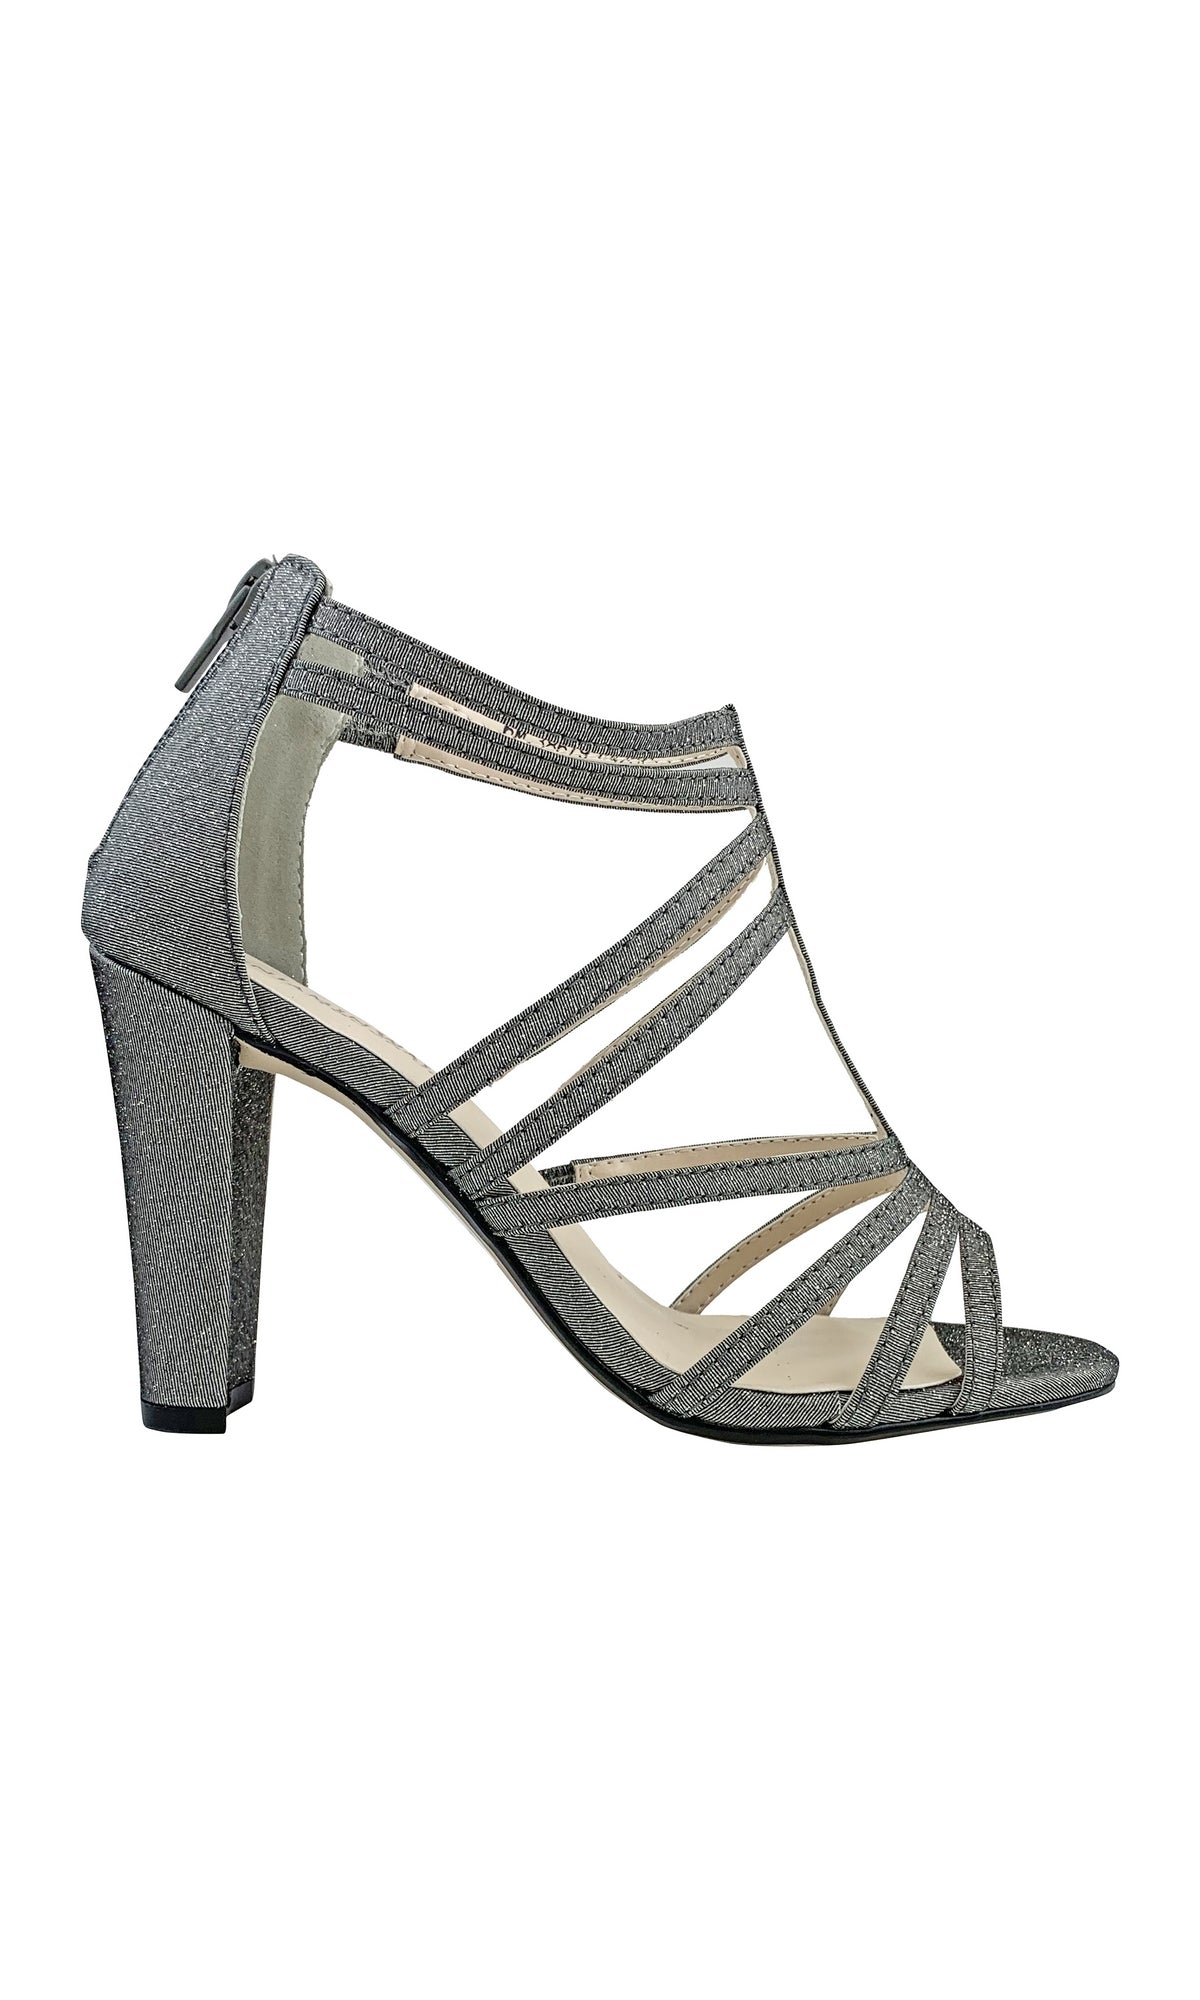 Rhyan Pewter Silver Sandal with a High Block Heel 4426